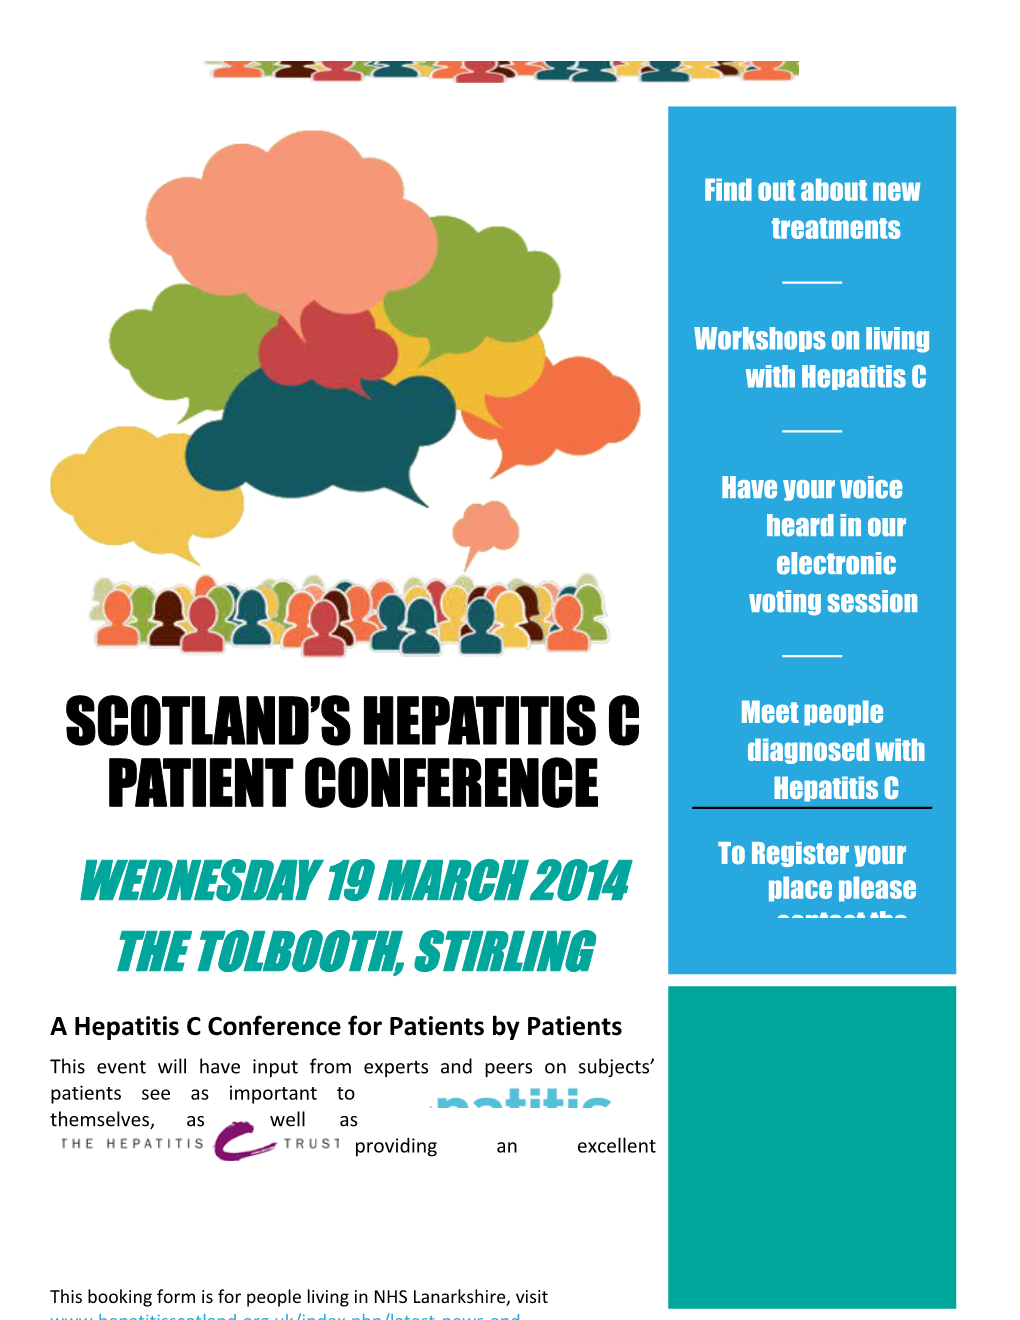 A Hepatitis C Conference for Patients by Patients